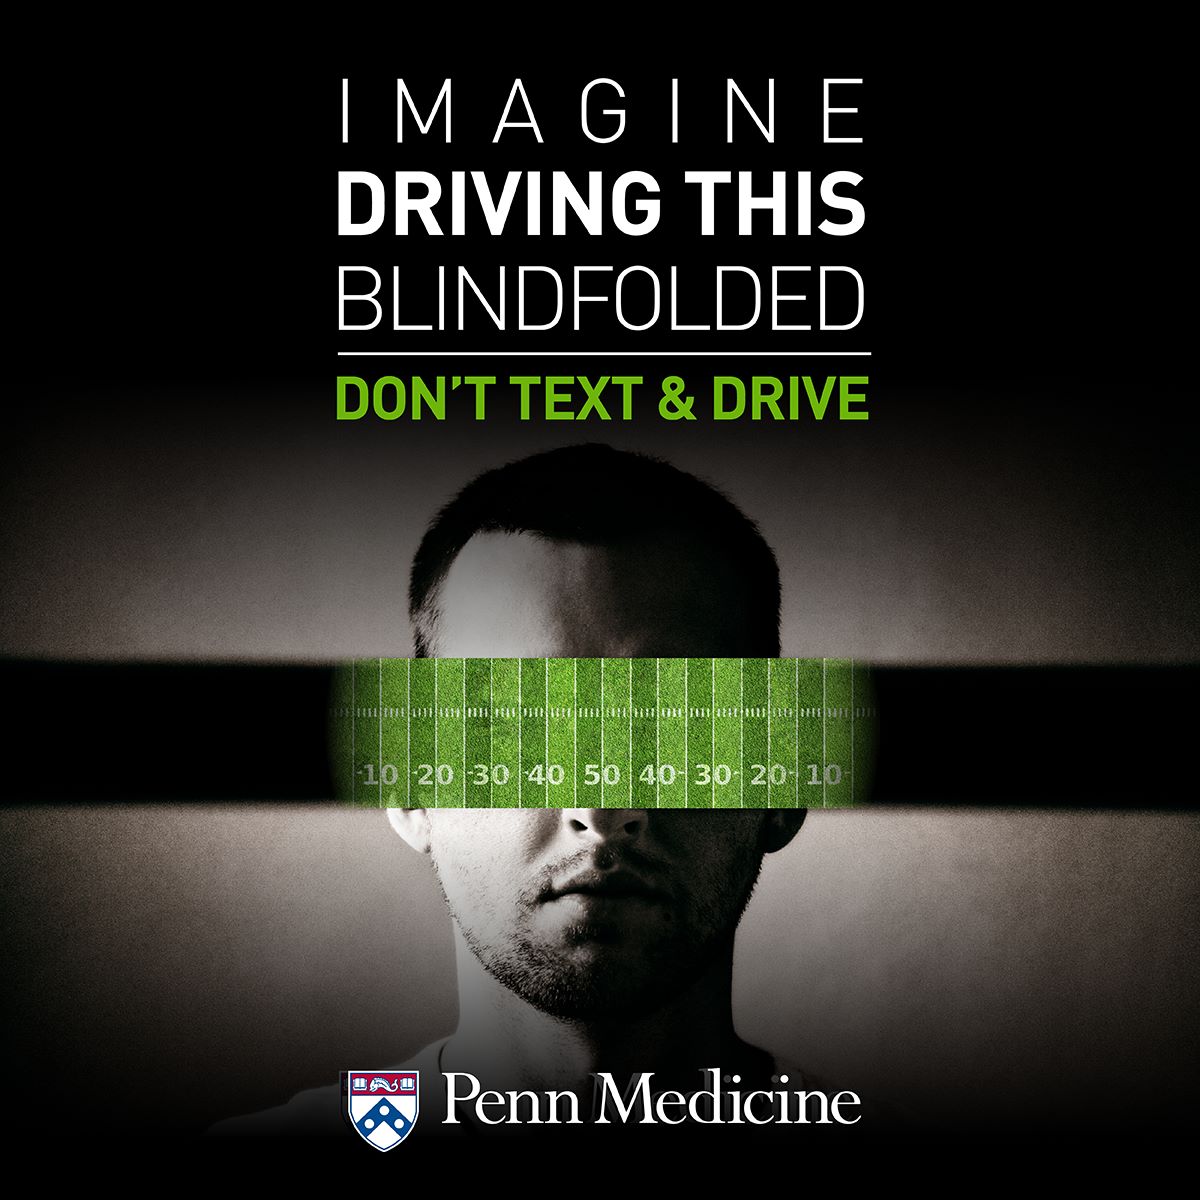 When you read or send a text while driving, you could drive the length of an entire football field without looking at the road. Protect yourself and others by putting your phone away while driving, and share this post to encourage others to do the same.